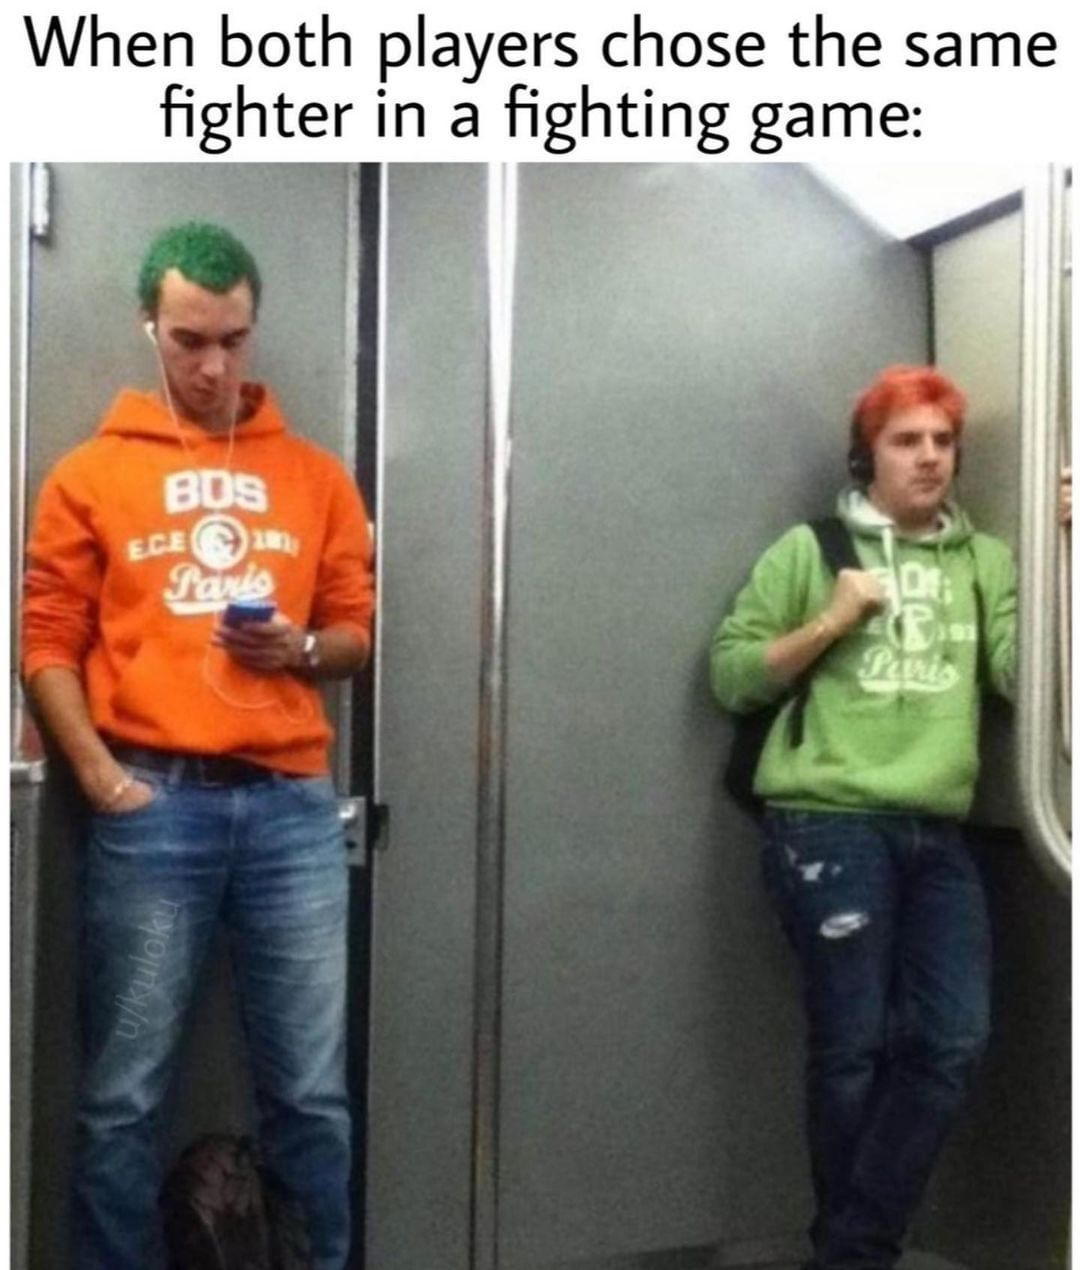 When both players chose the same fighter in a fighting game: